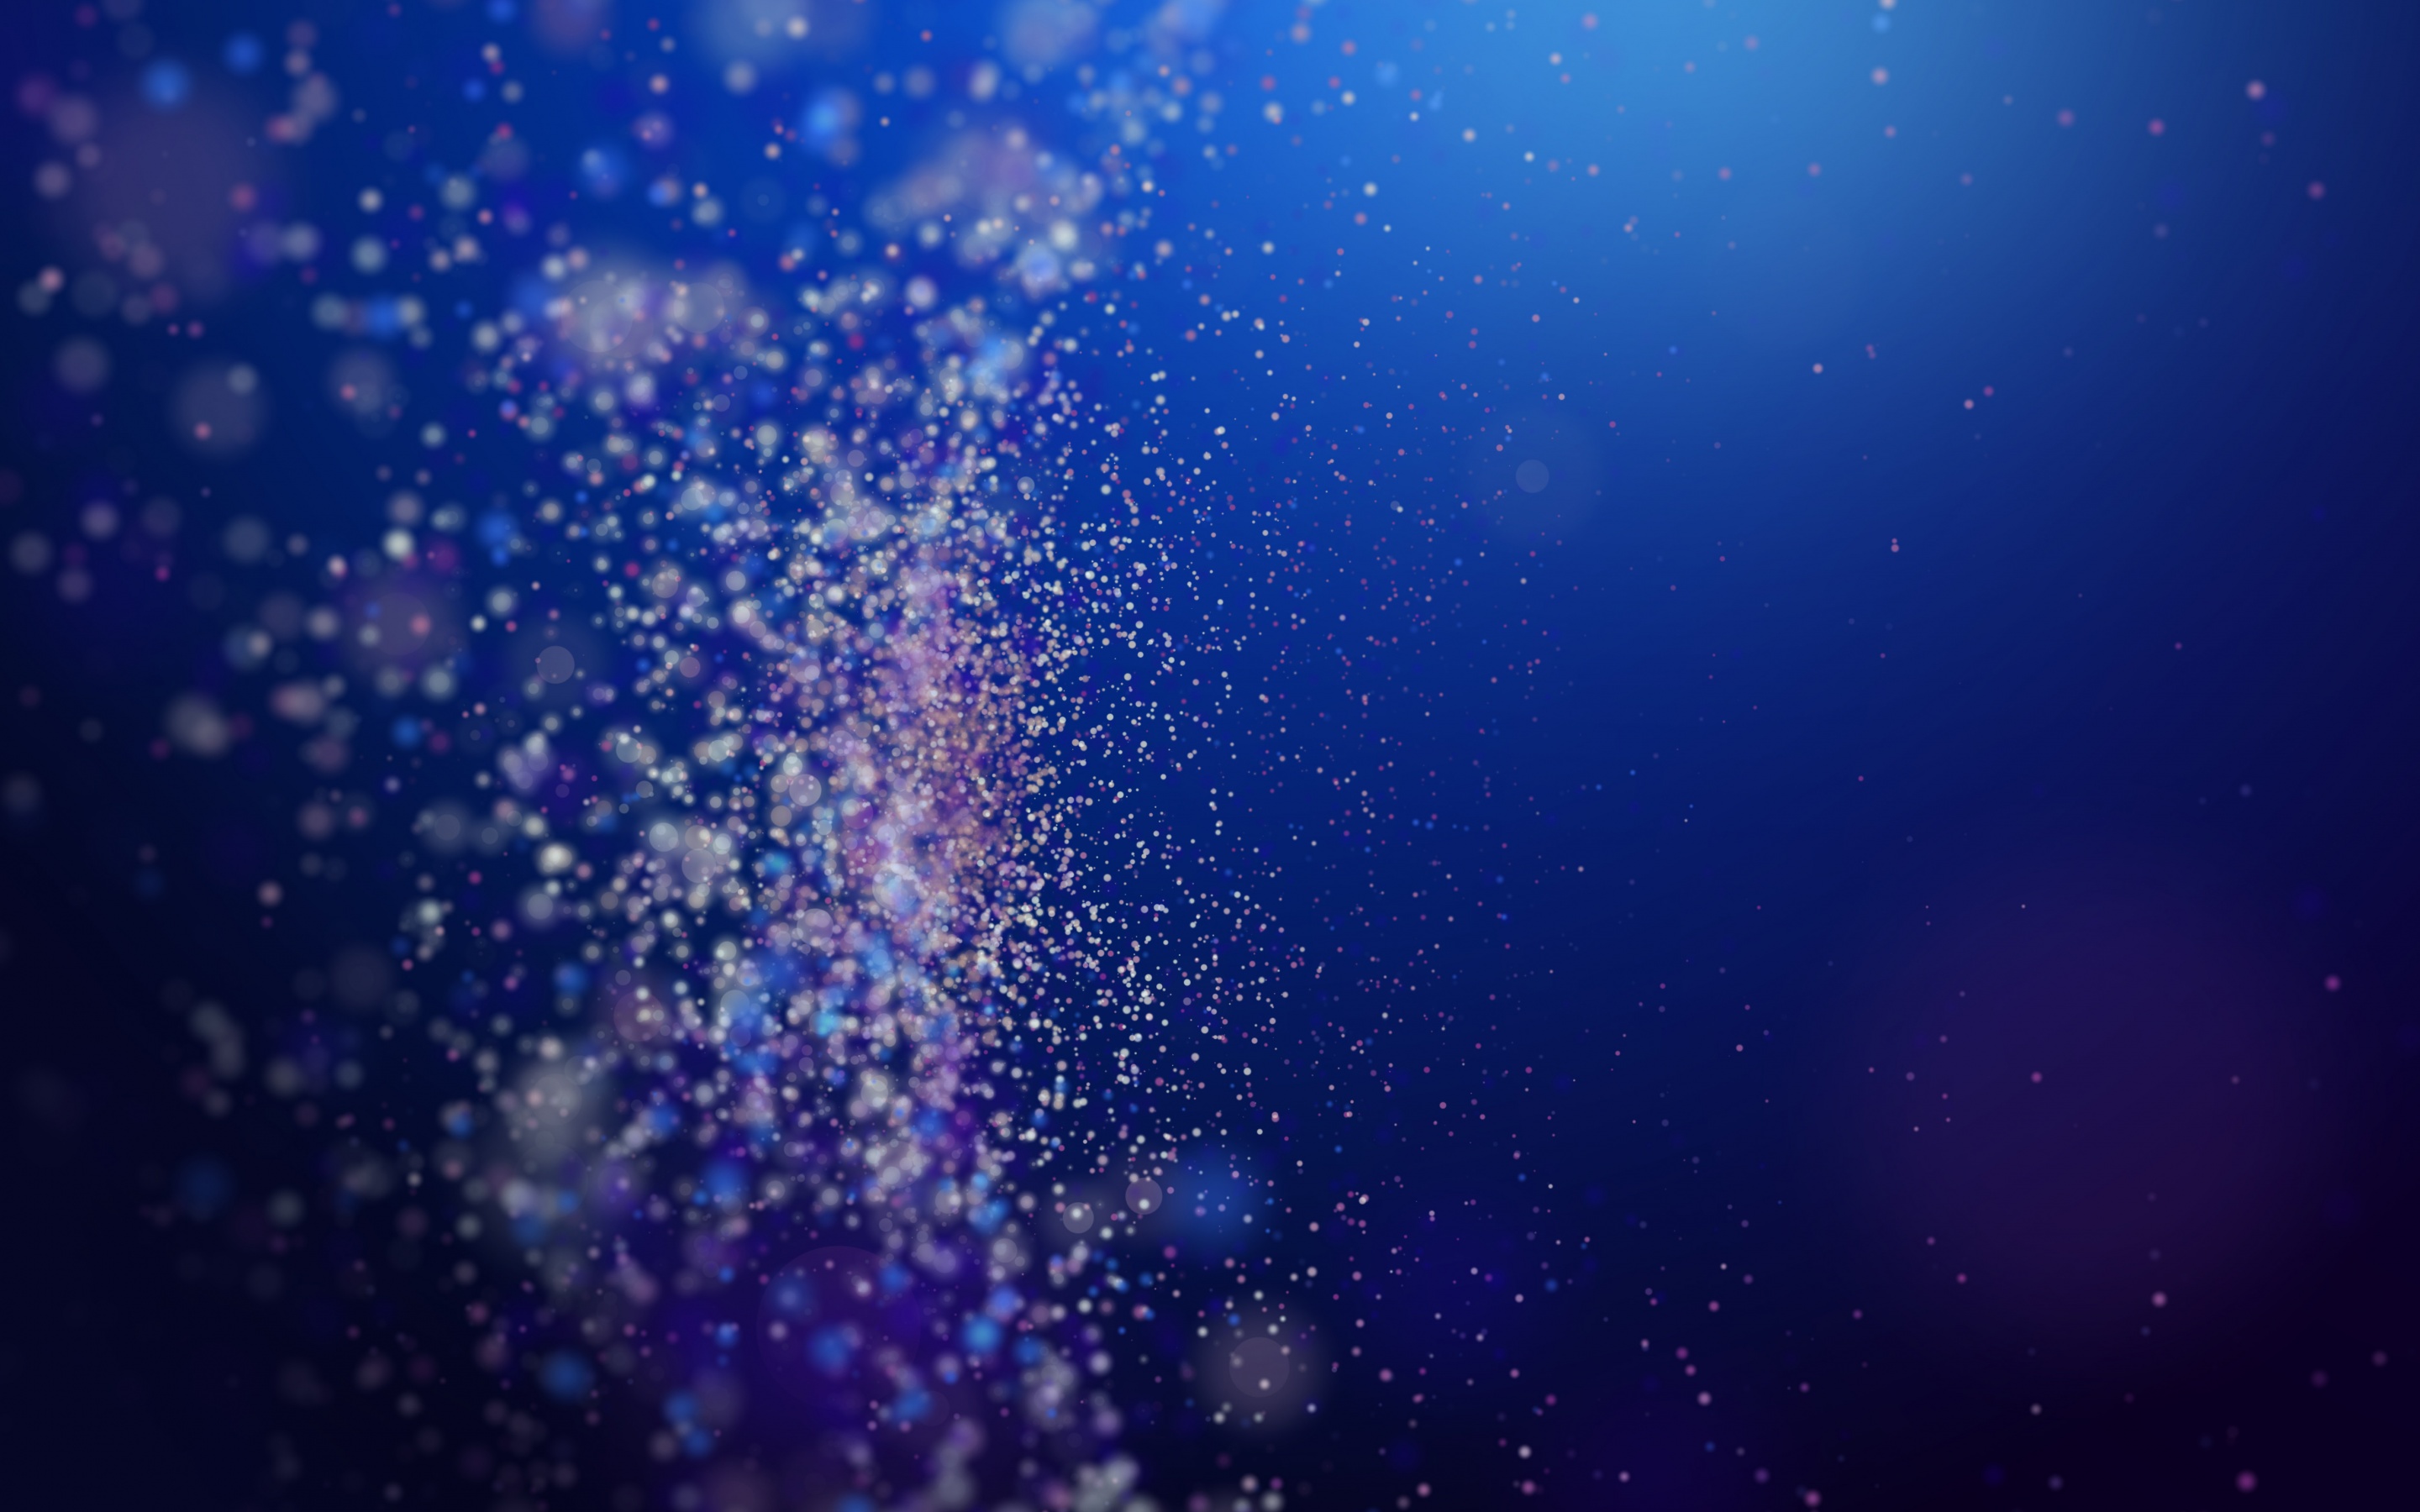 Awesome Particles Wallpaper 47242 2880x1800px